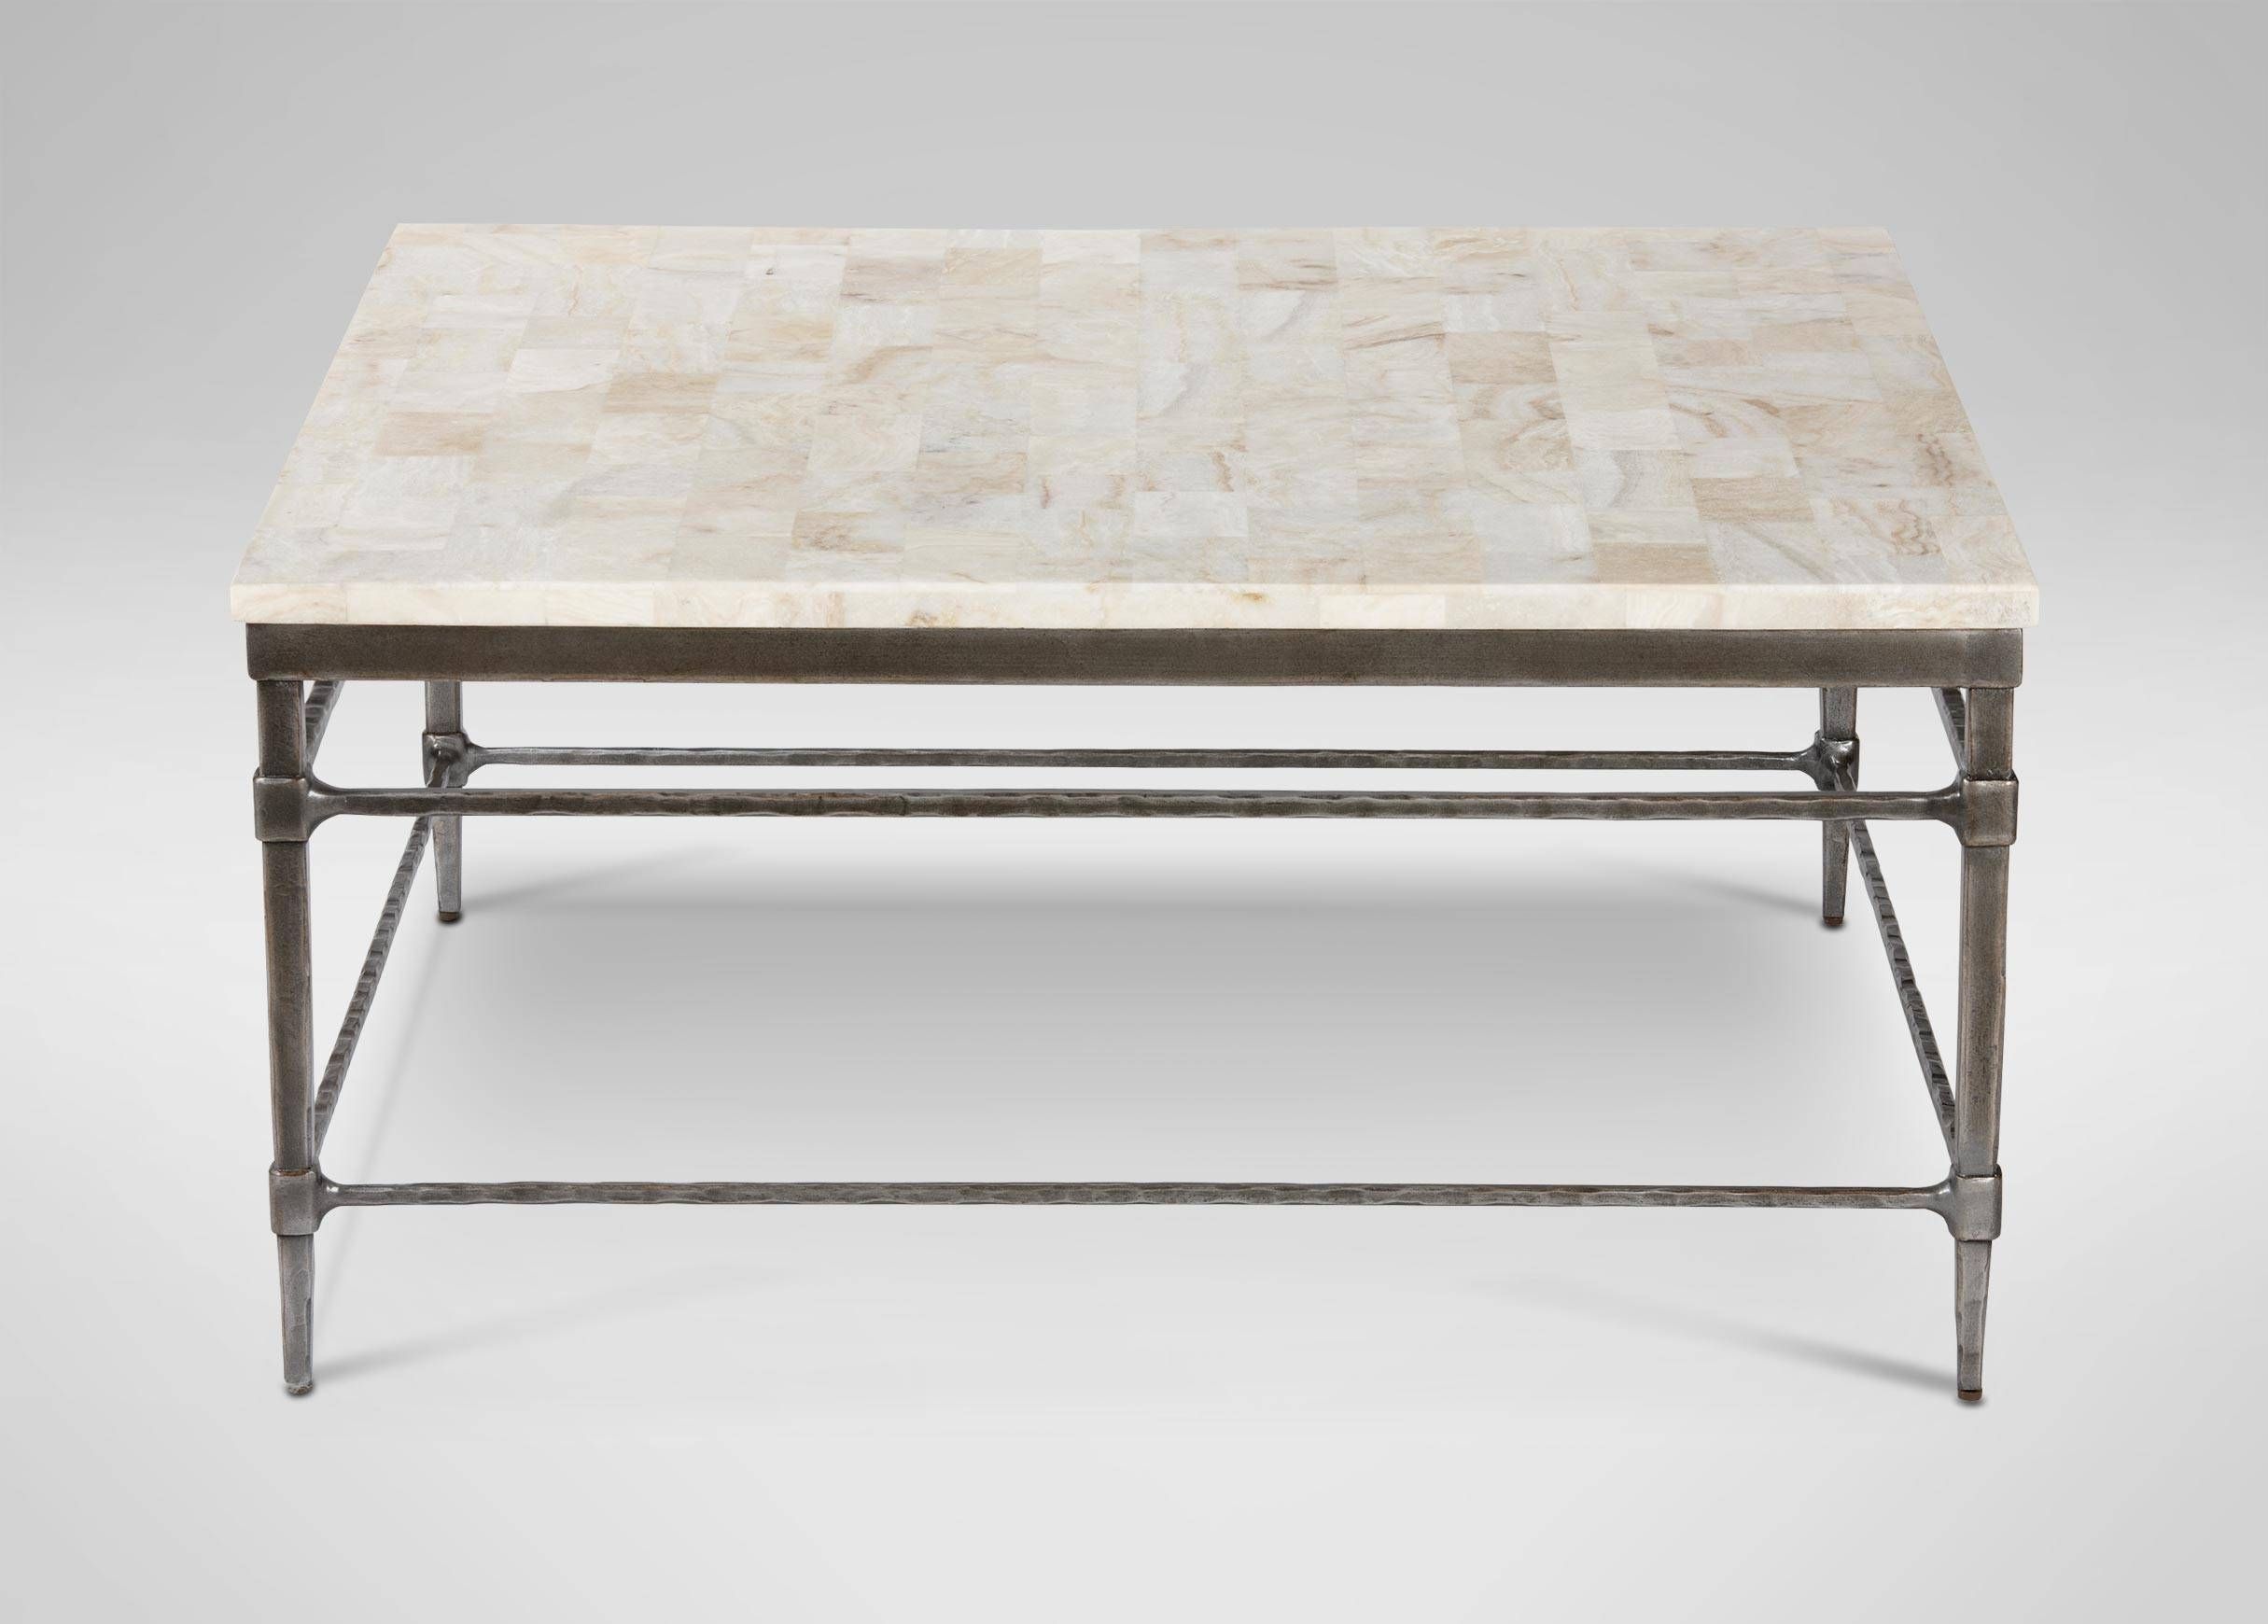 Vida Square Stone Top Coffee Table | Coffee Tables With Metal Square Coffee Tables (View 10 of 30)